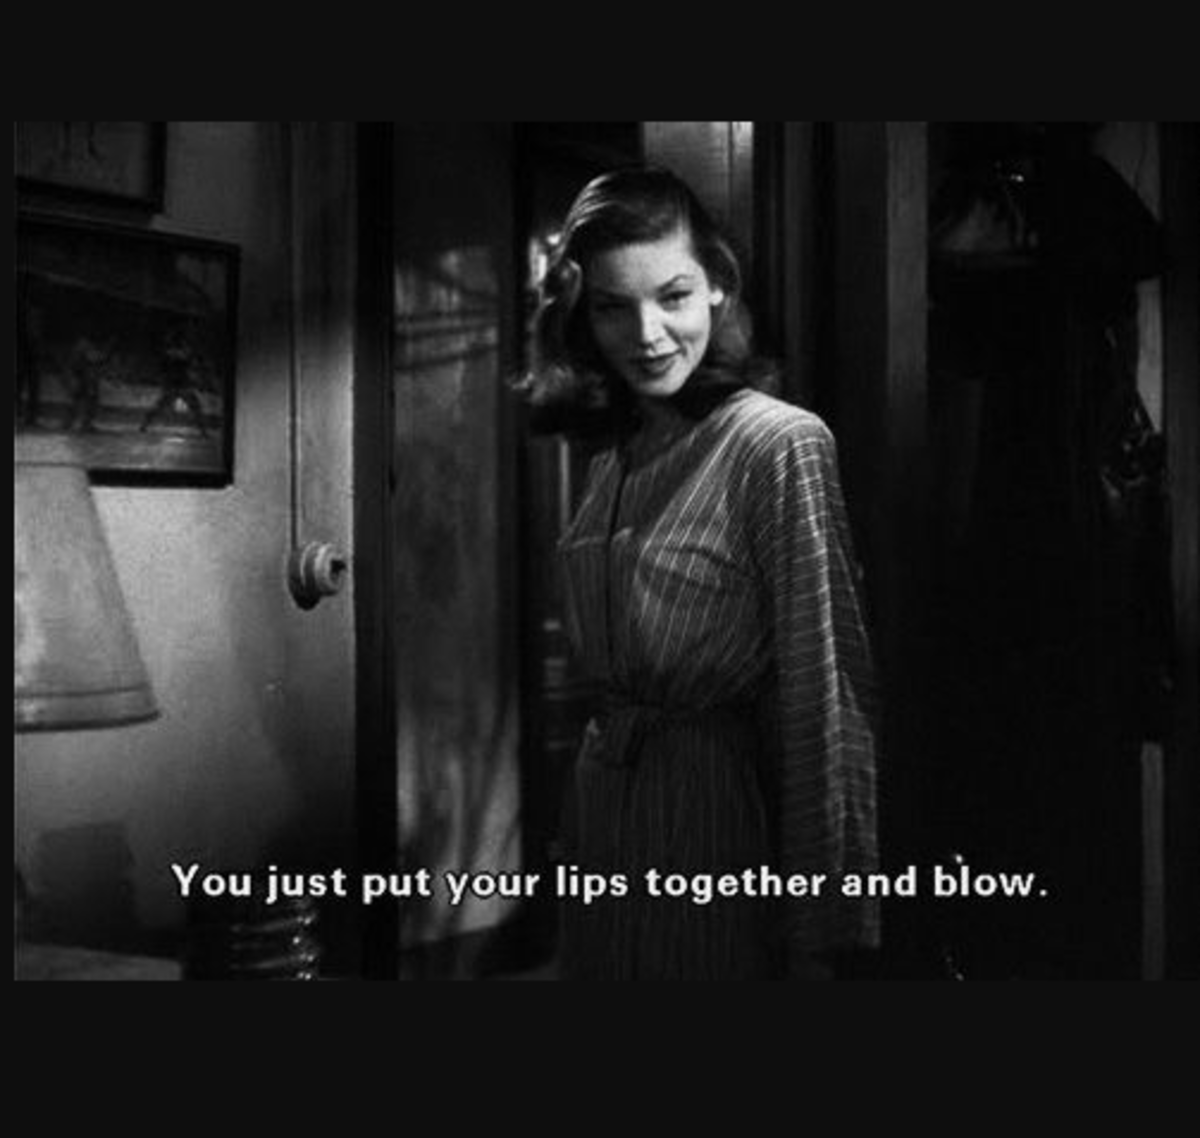 Lauren Bacall giving famous quote